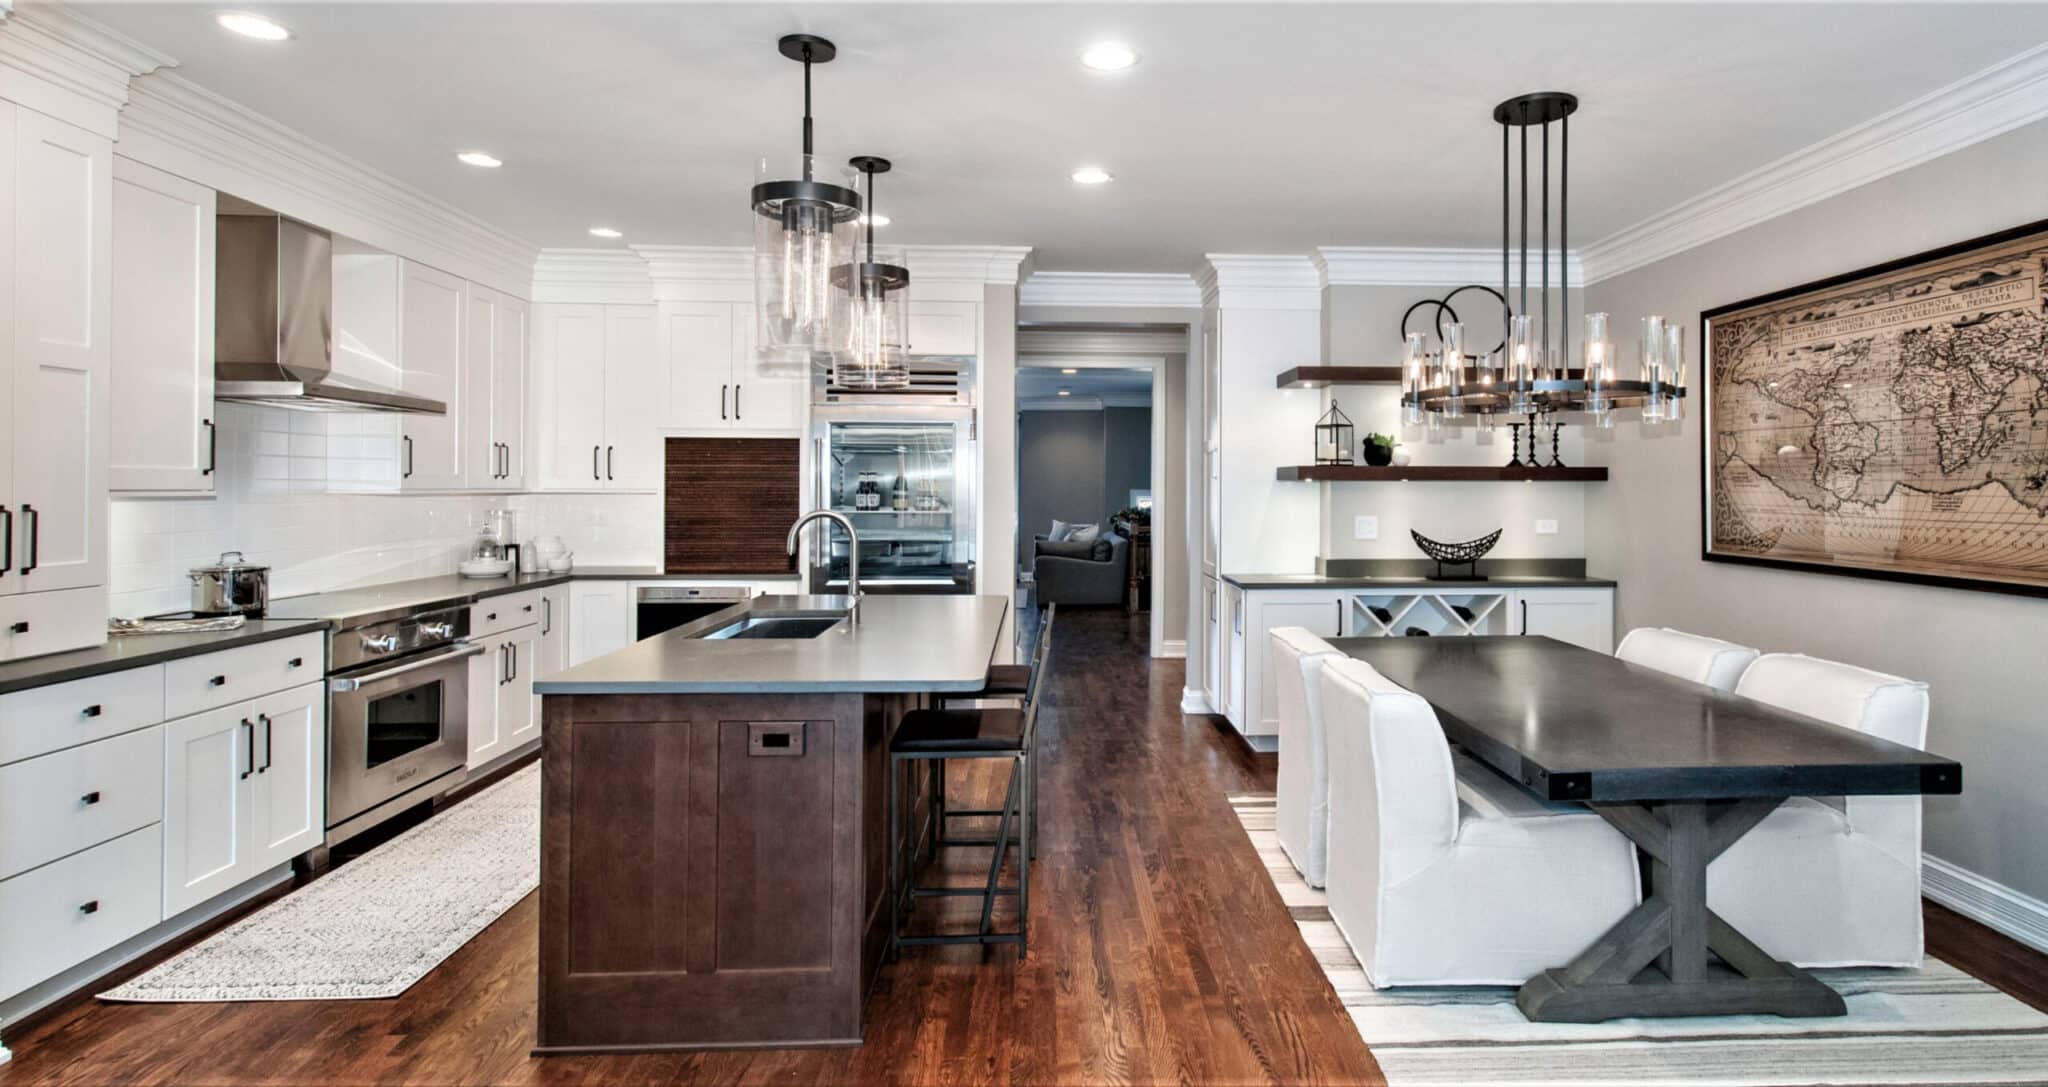 Woodharbor white kitchen cabinets with black countertops and dark brown kitchen island with grey countertop